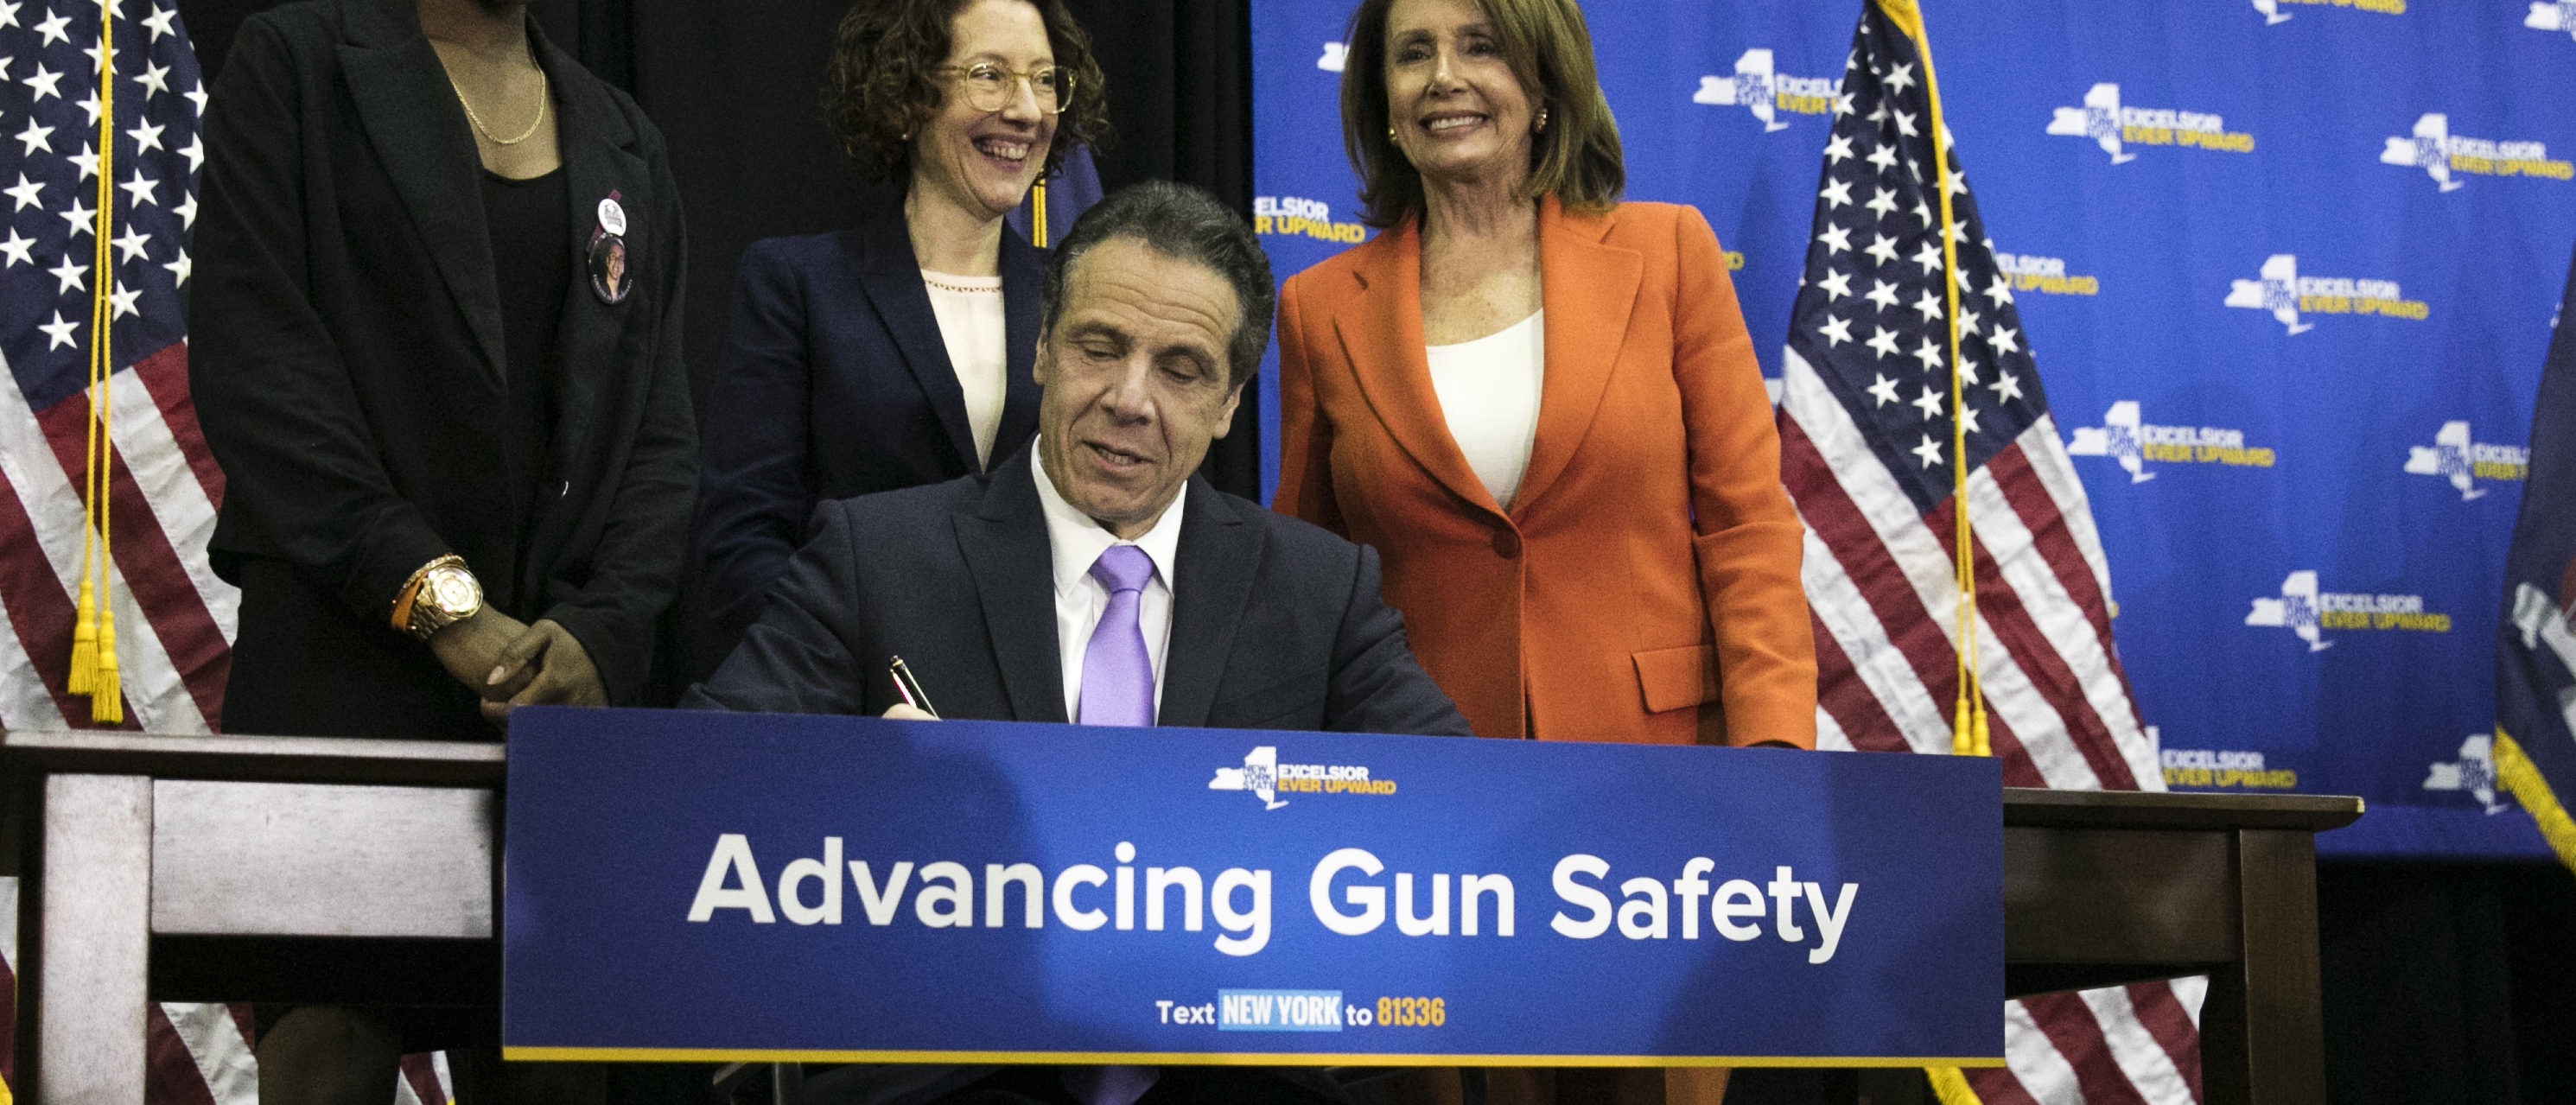 New York Bans Teachers From Carrying Guns In The Classroom | The Daily Caller